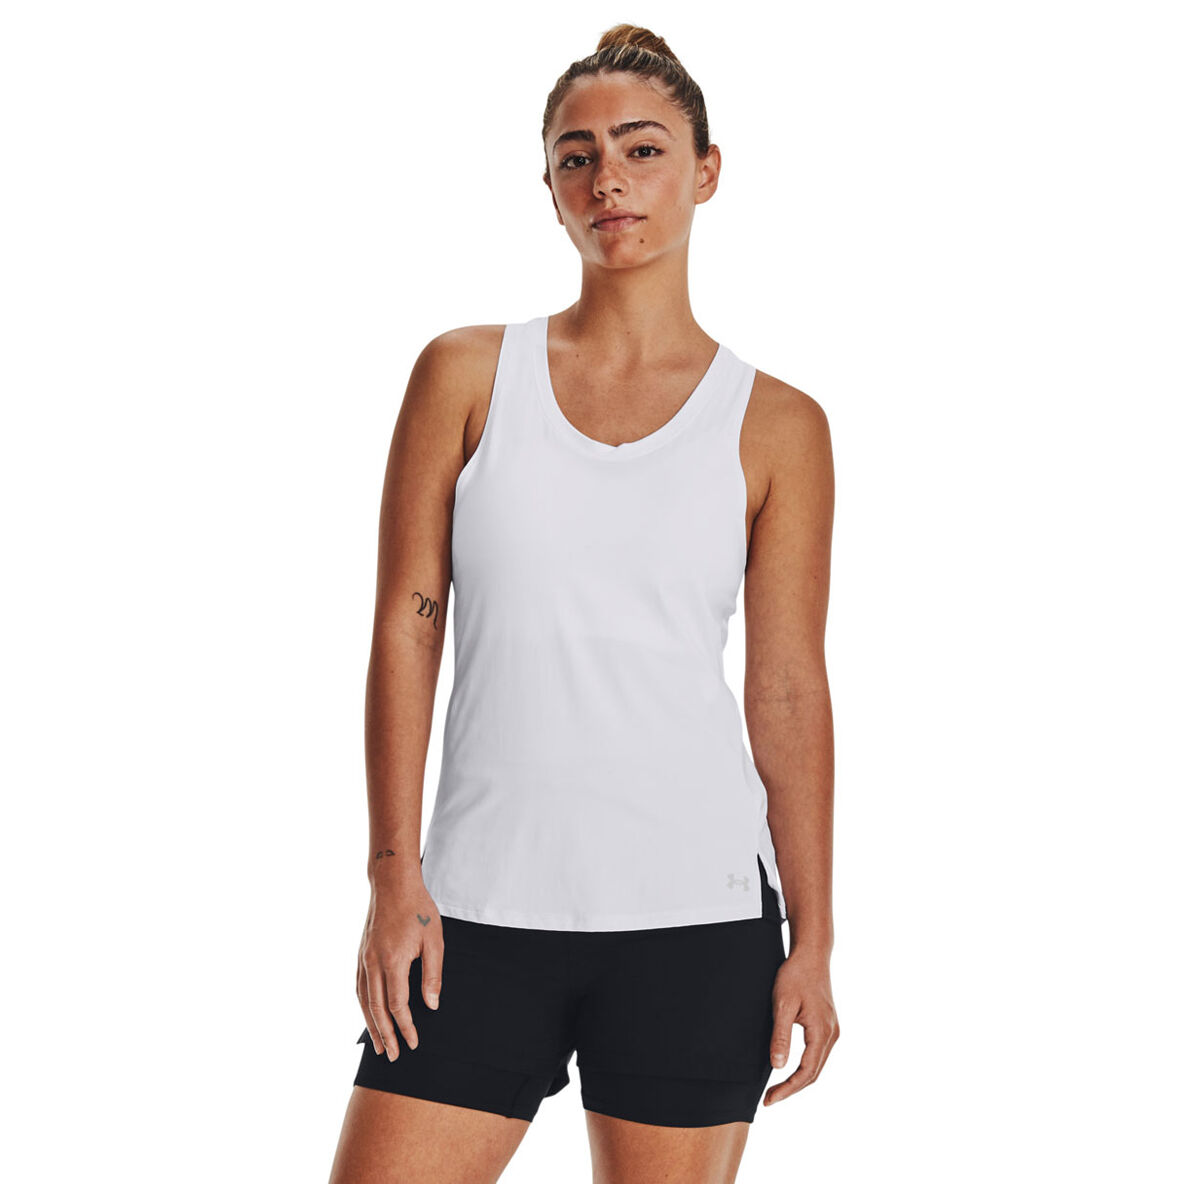 Women's Running Gear - Shoes, Clothing & Accessories - rebel